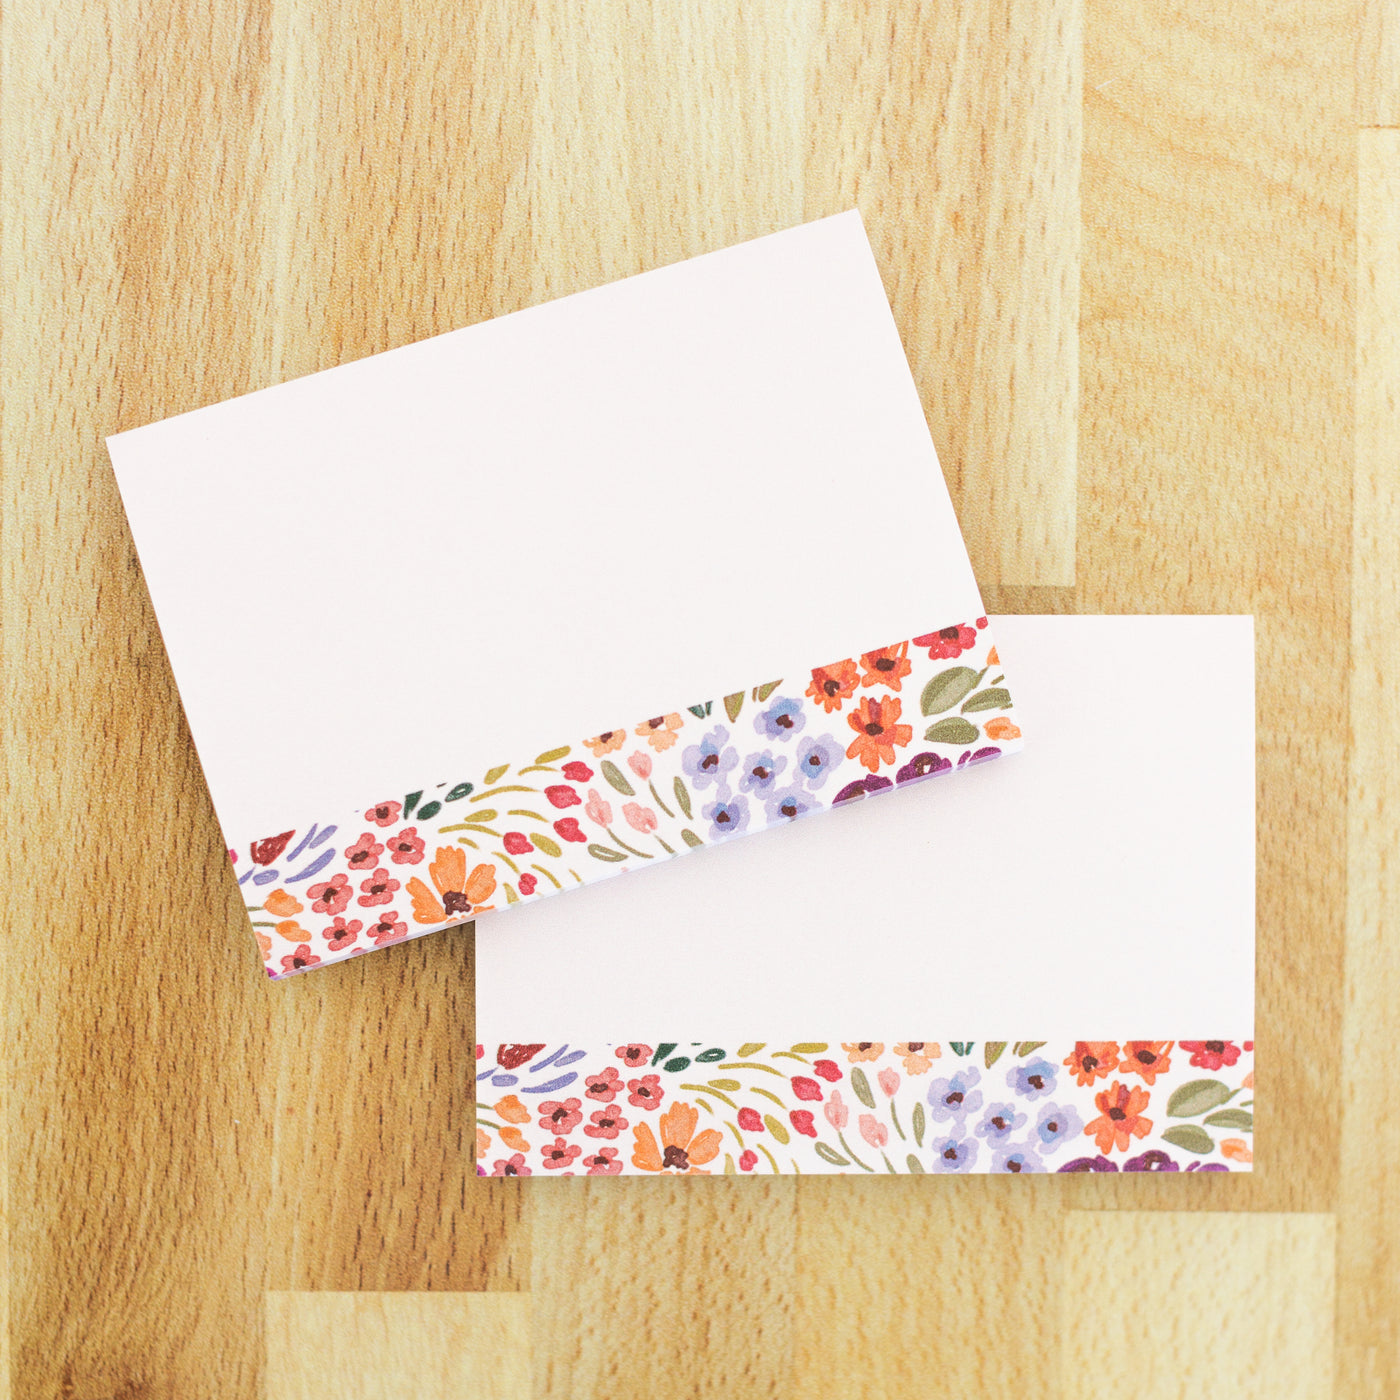 Pack of 2 Post-It® Notes, 4x3"